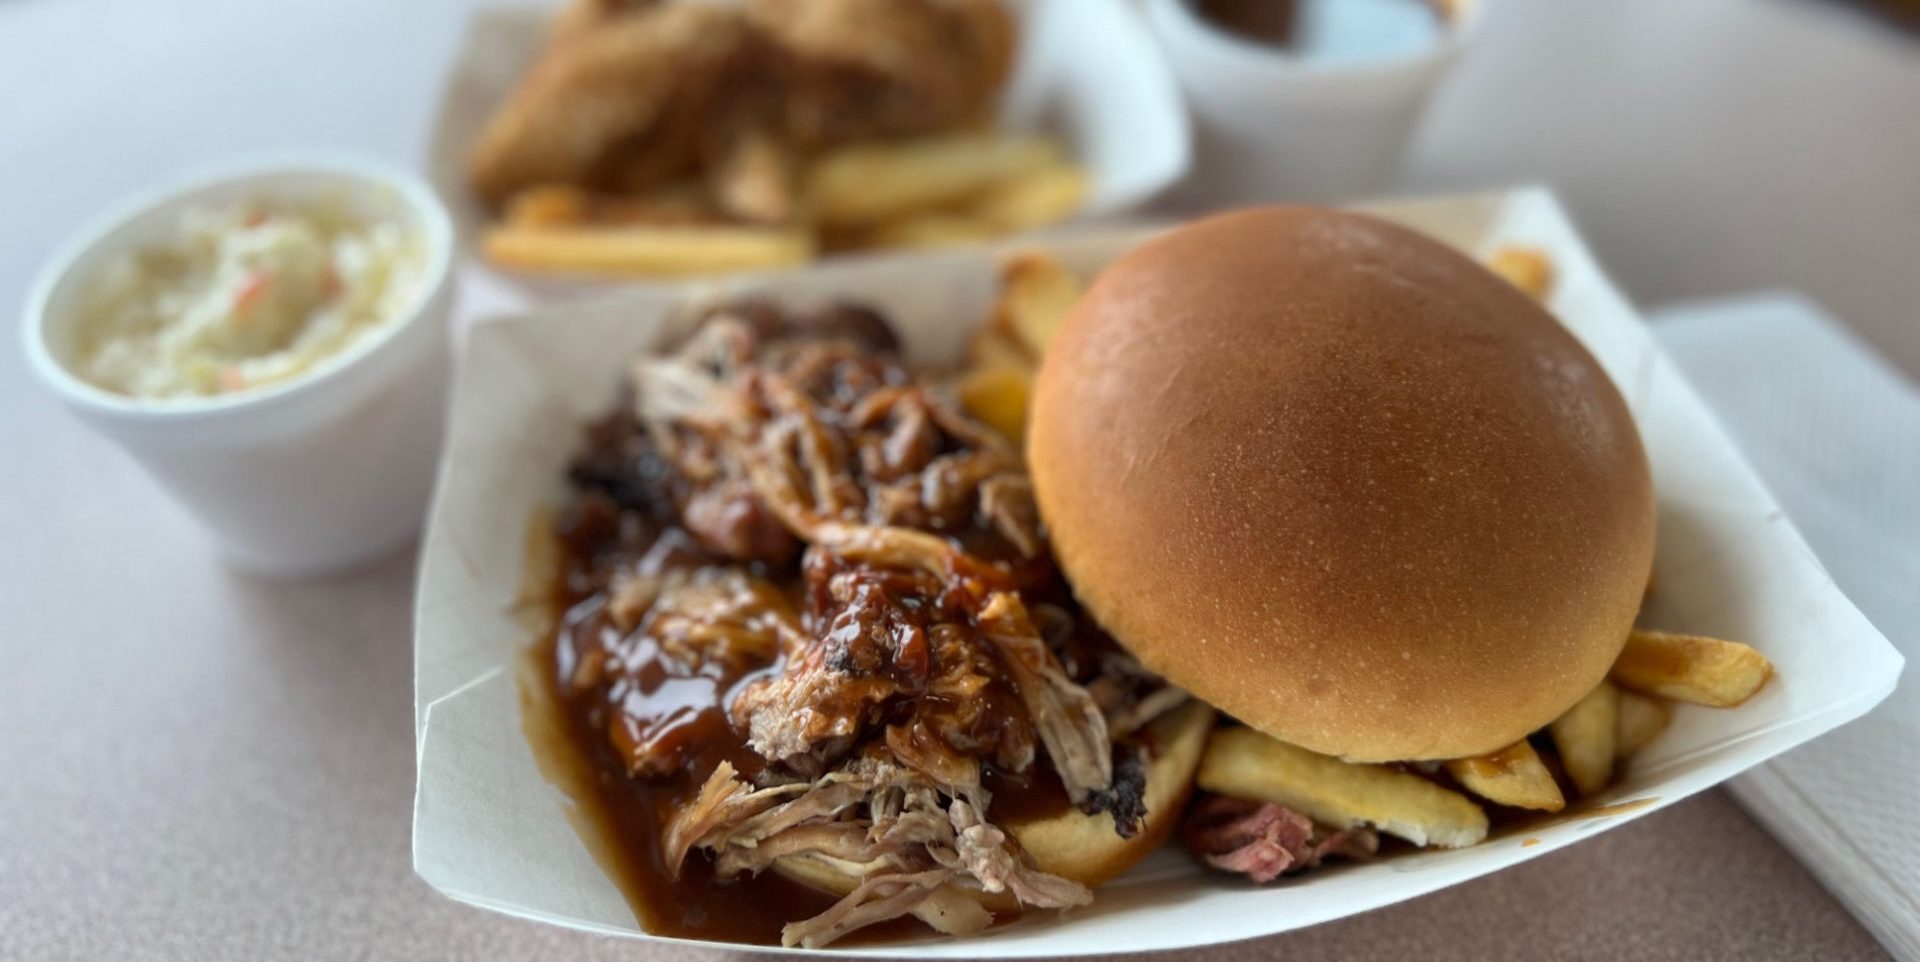 A pulled pork sandwich with sauce in a paper basket.